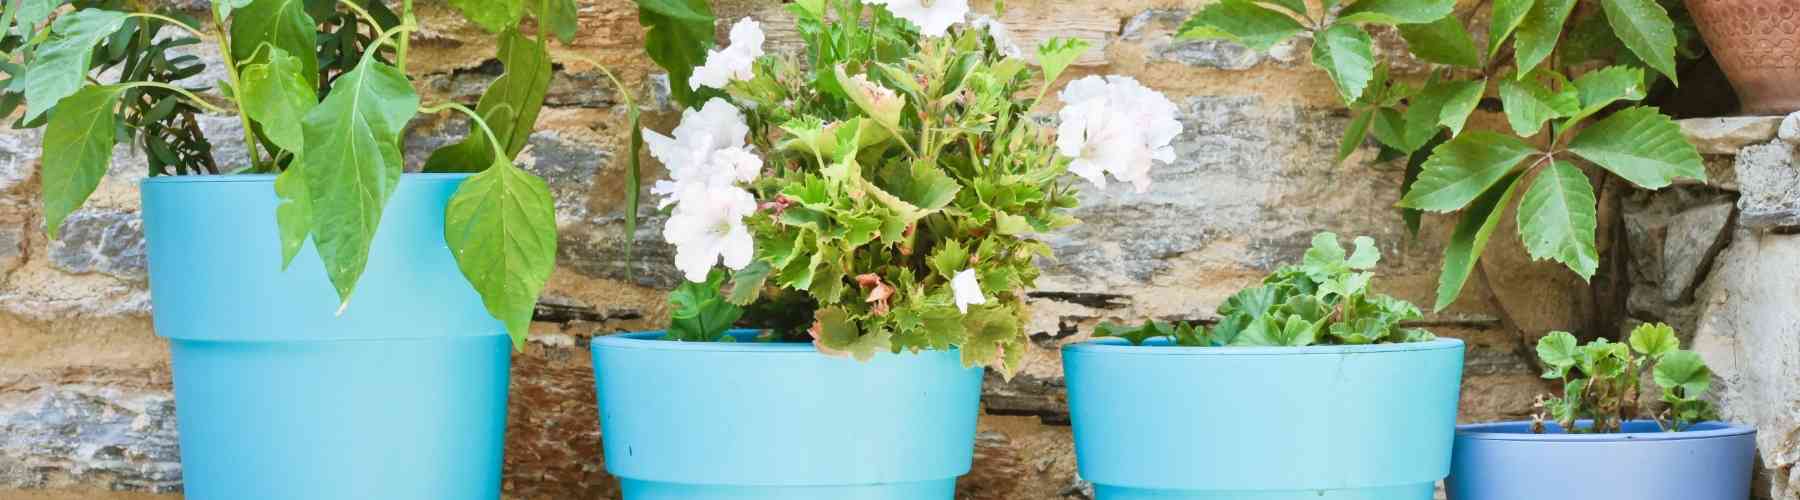 Crafts to Make and Sell - Plant Pots